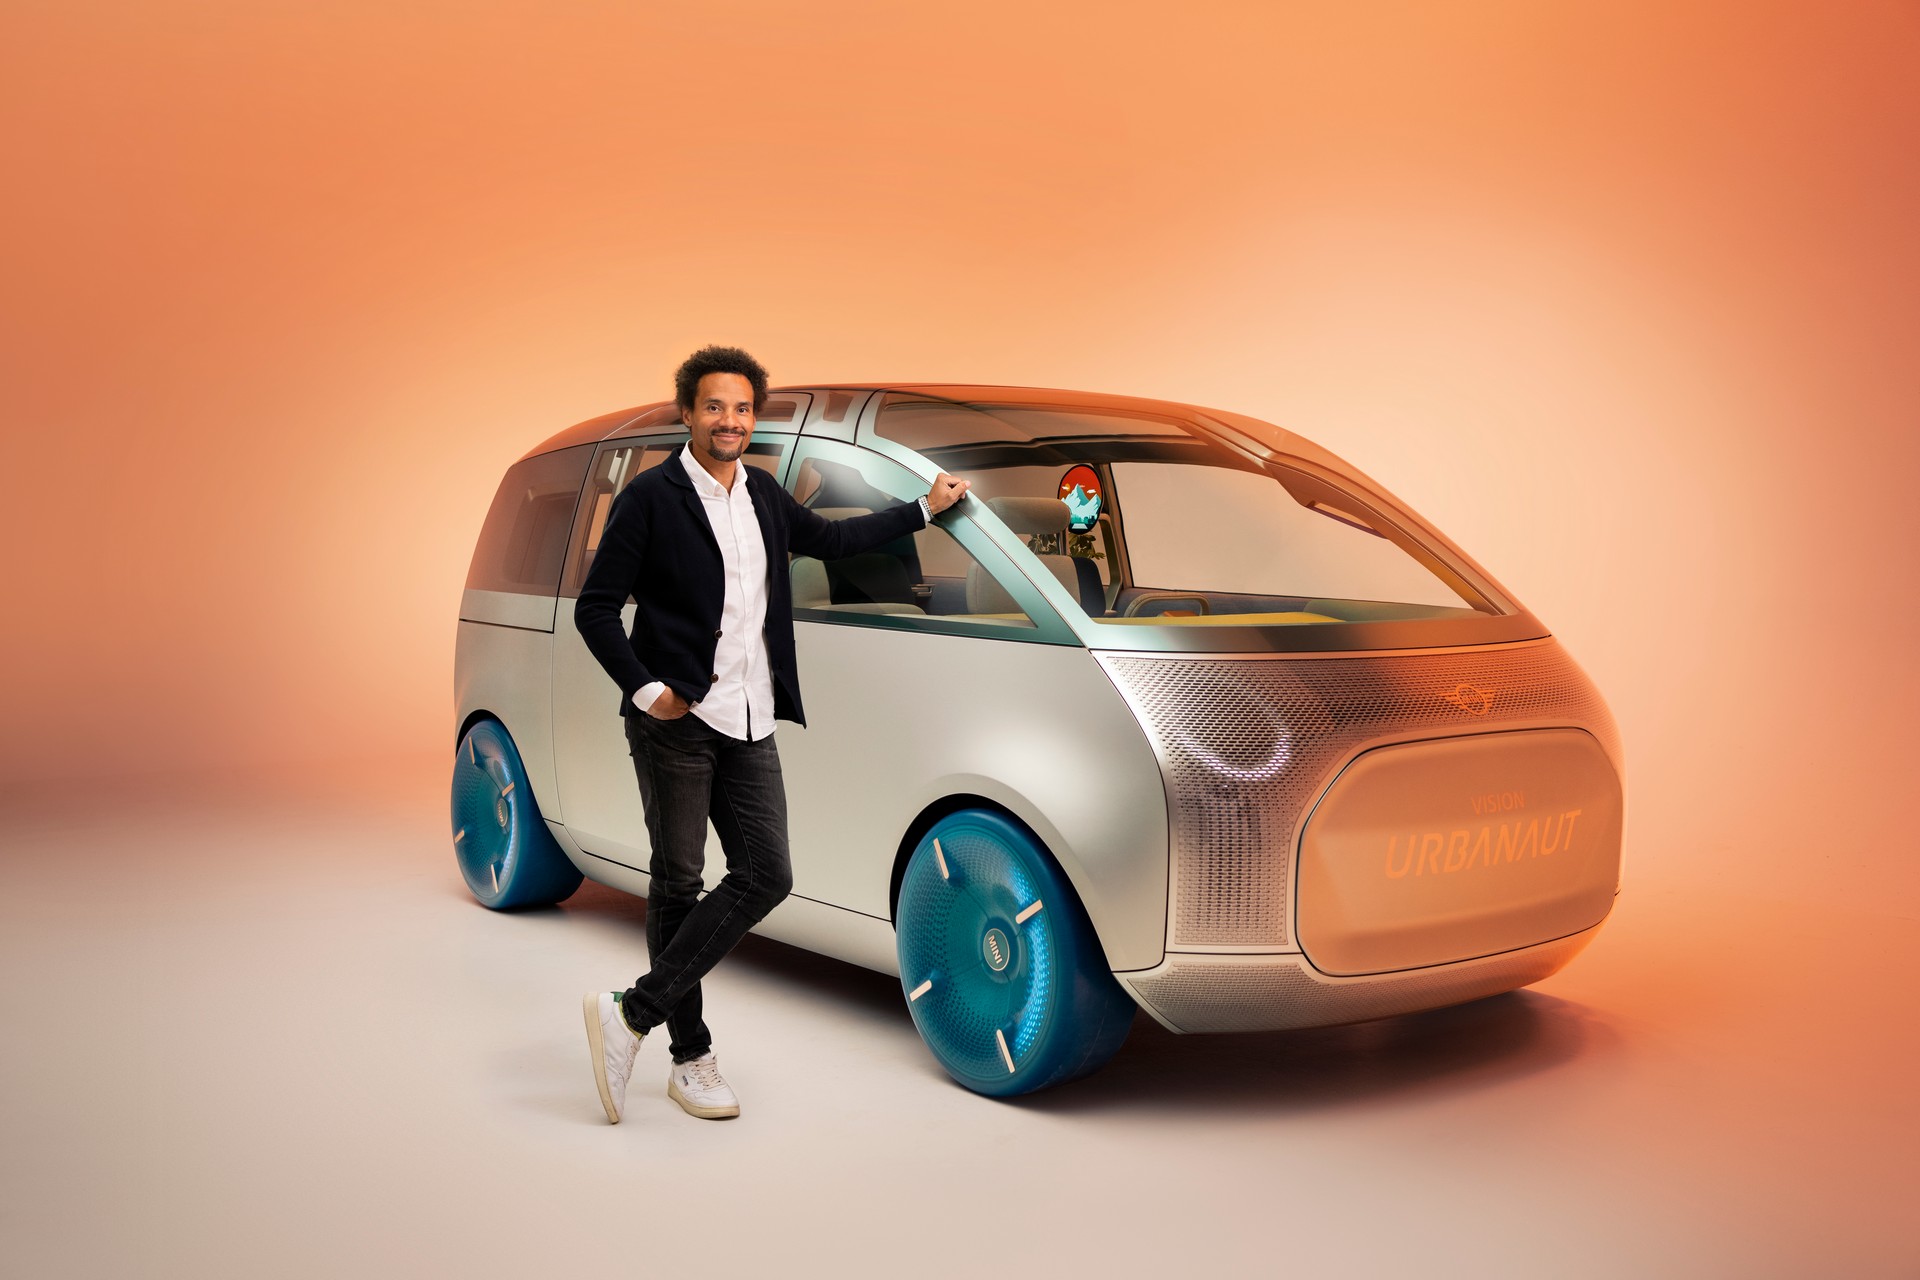 MINI Vision Urbanaut Makes The Jump From Digital To Real Life Concept ...